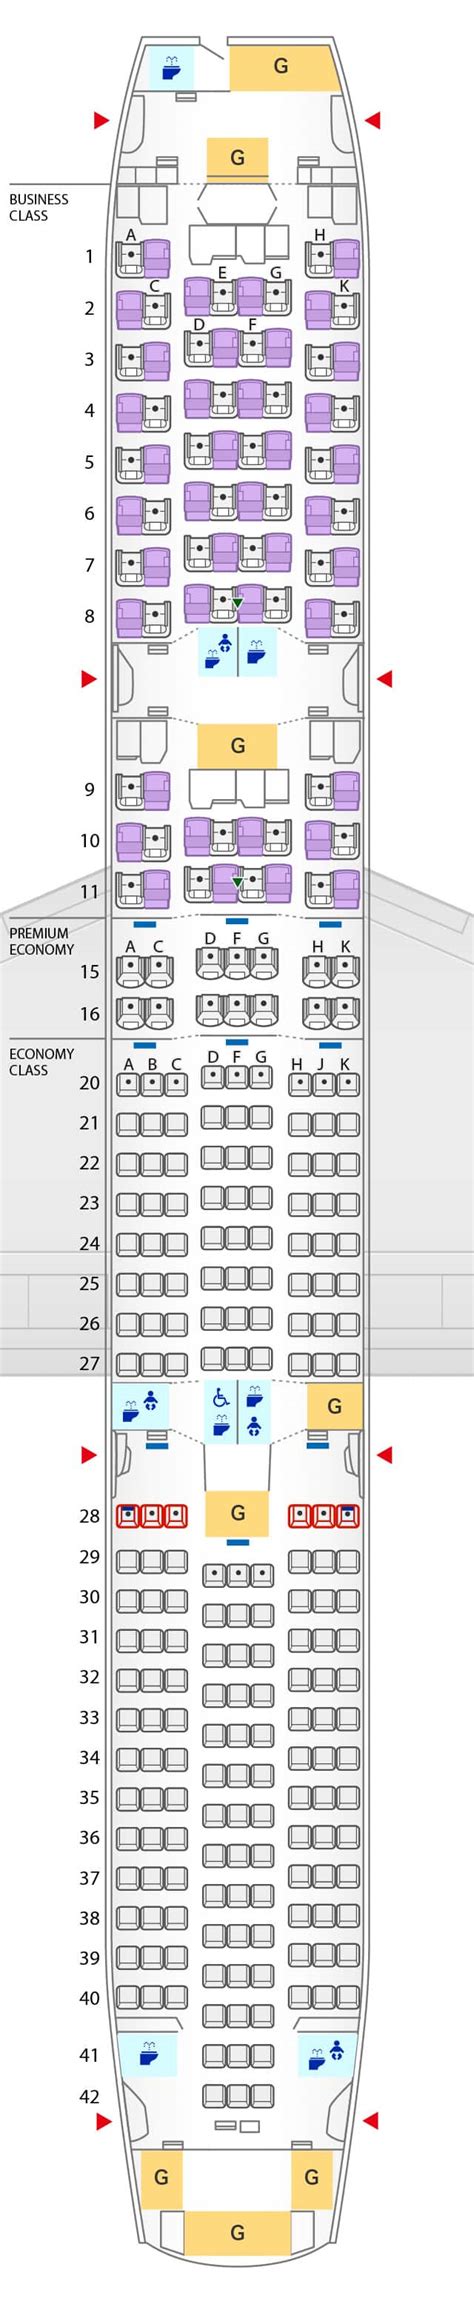 Boeing 787 9 dreamliner seat map. Feb 14, 2019 ... A HUGE thank you to WestJet for allowing me to get such a great look at their brand new aircraft! This is WestJet's first Boeing 787-9 ... 